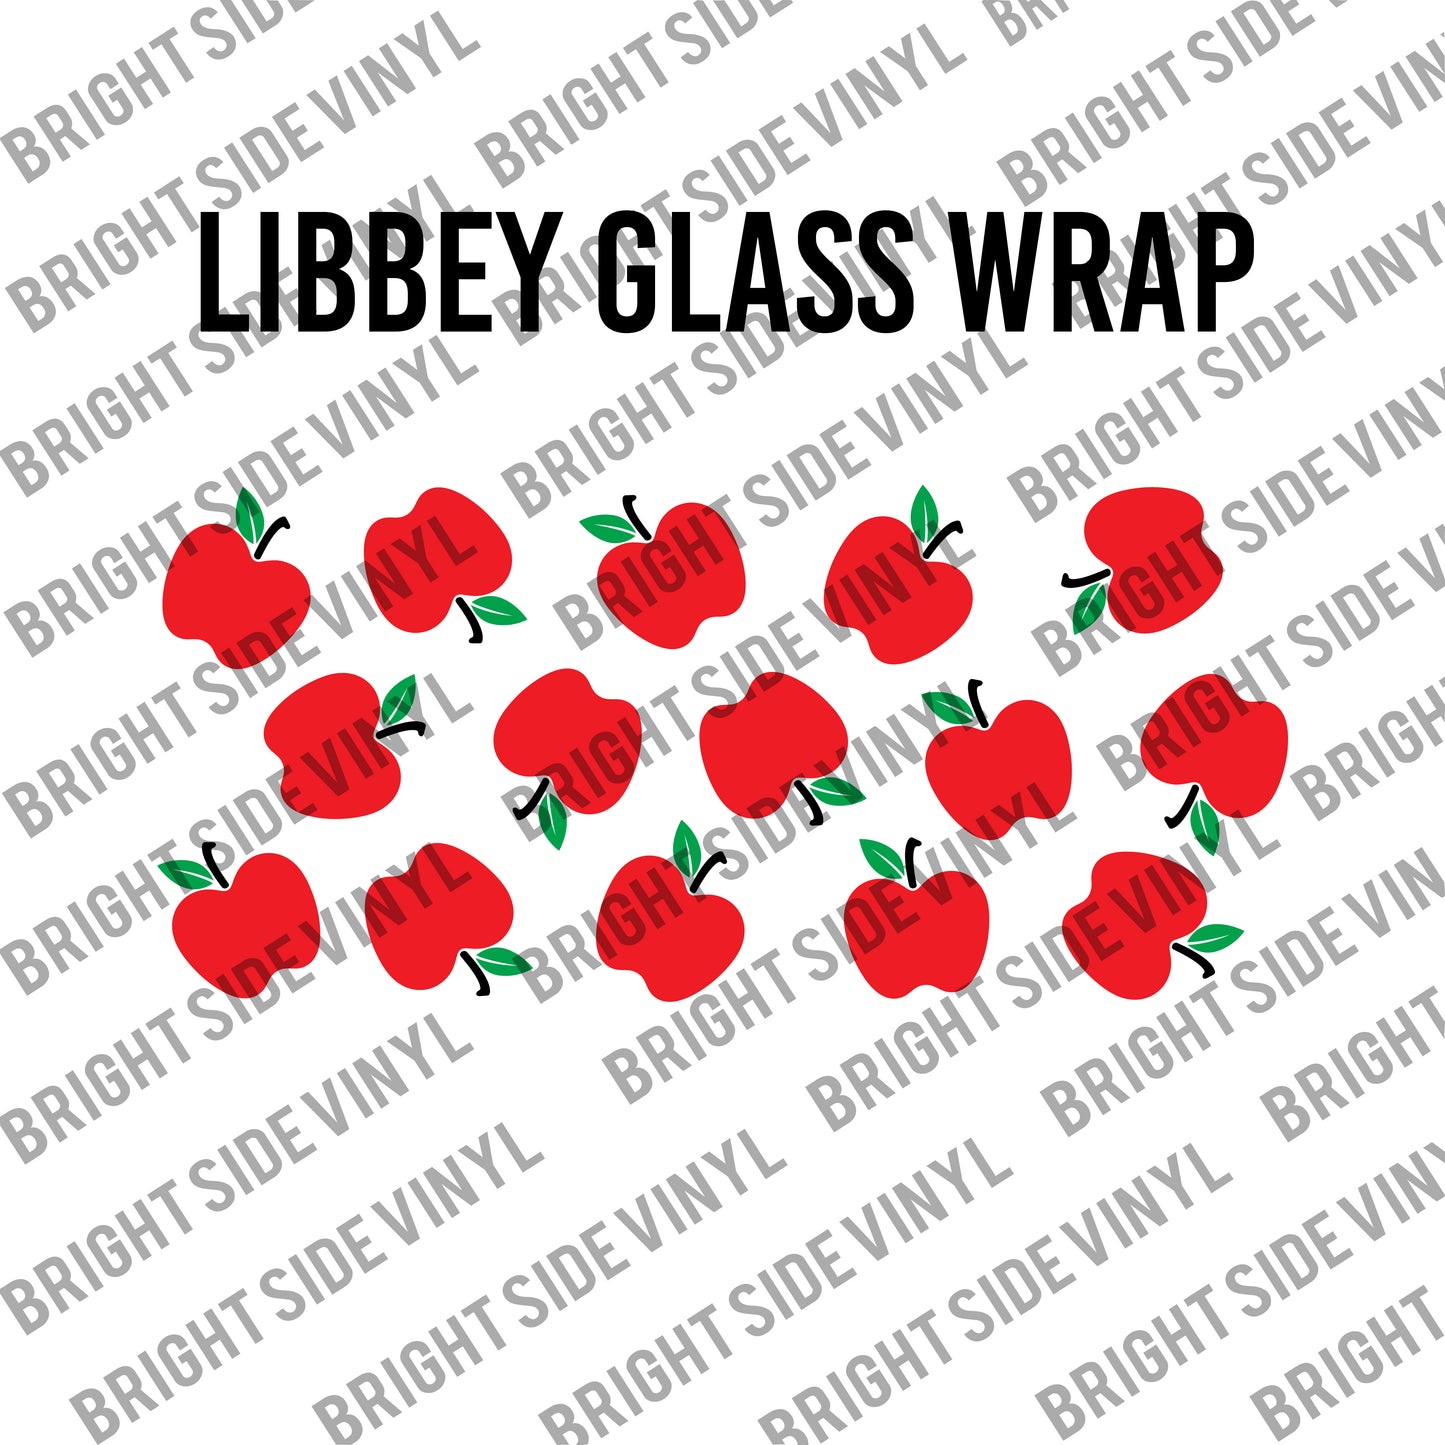 Red Apple (Libbey Glass Wrap)